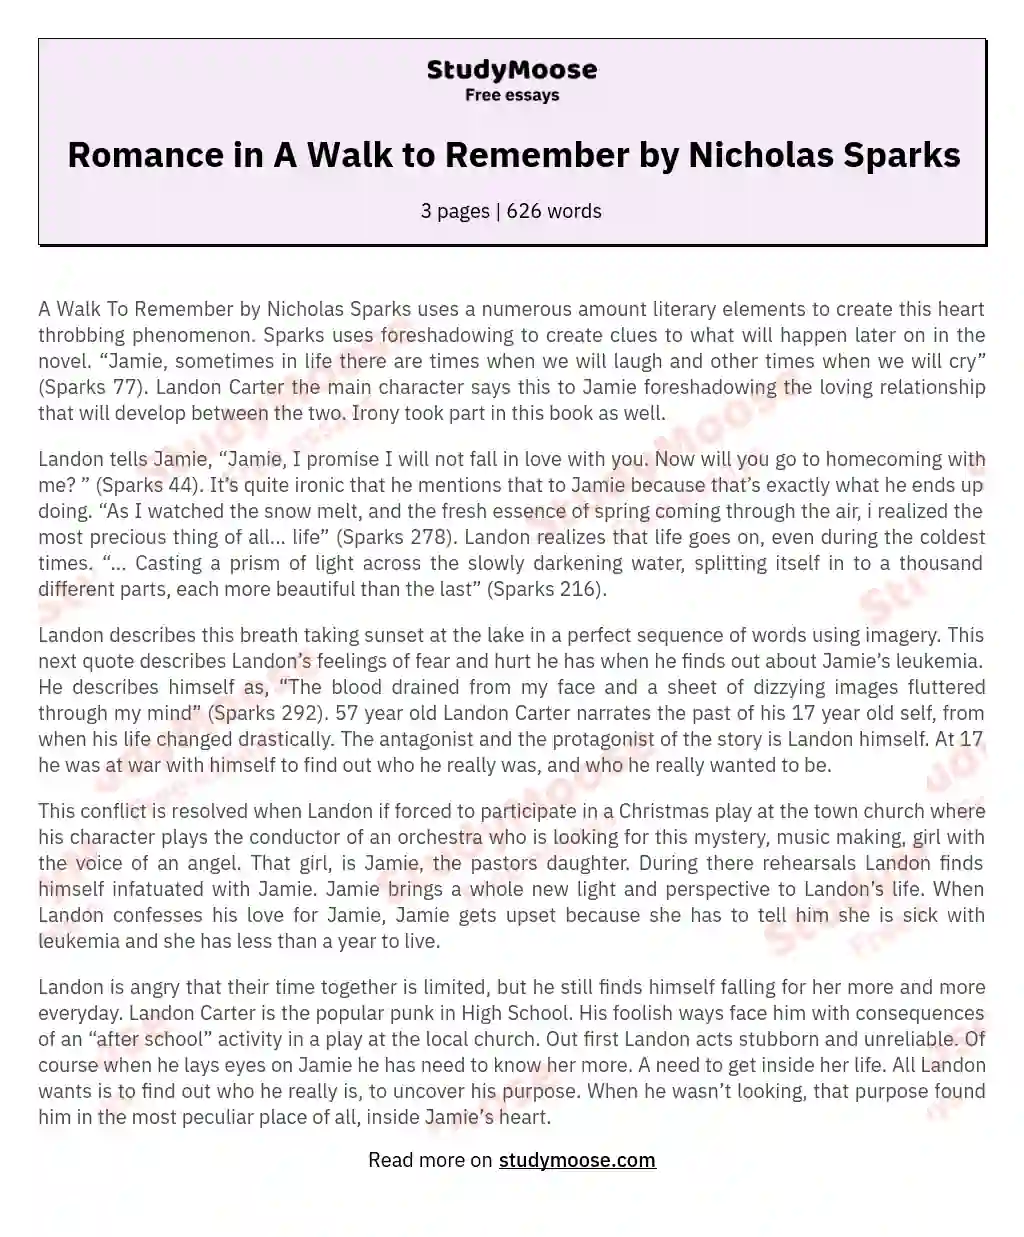 Romance in A Walk to Remember by Nicholas Sparks essay